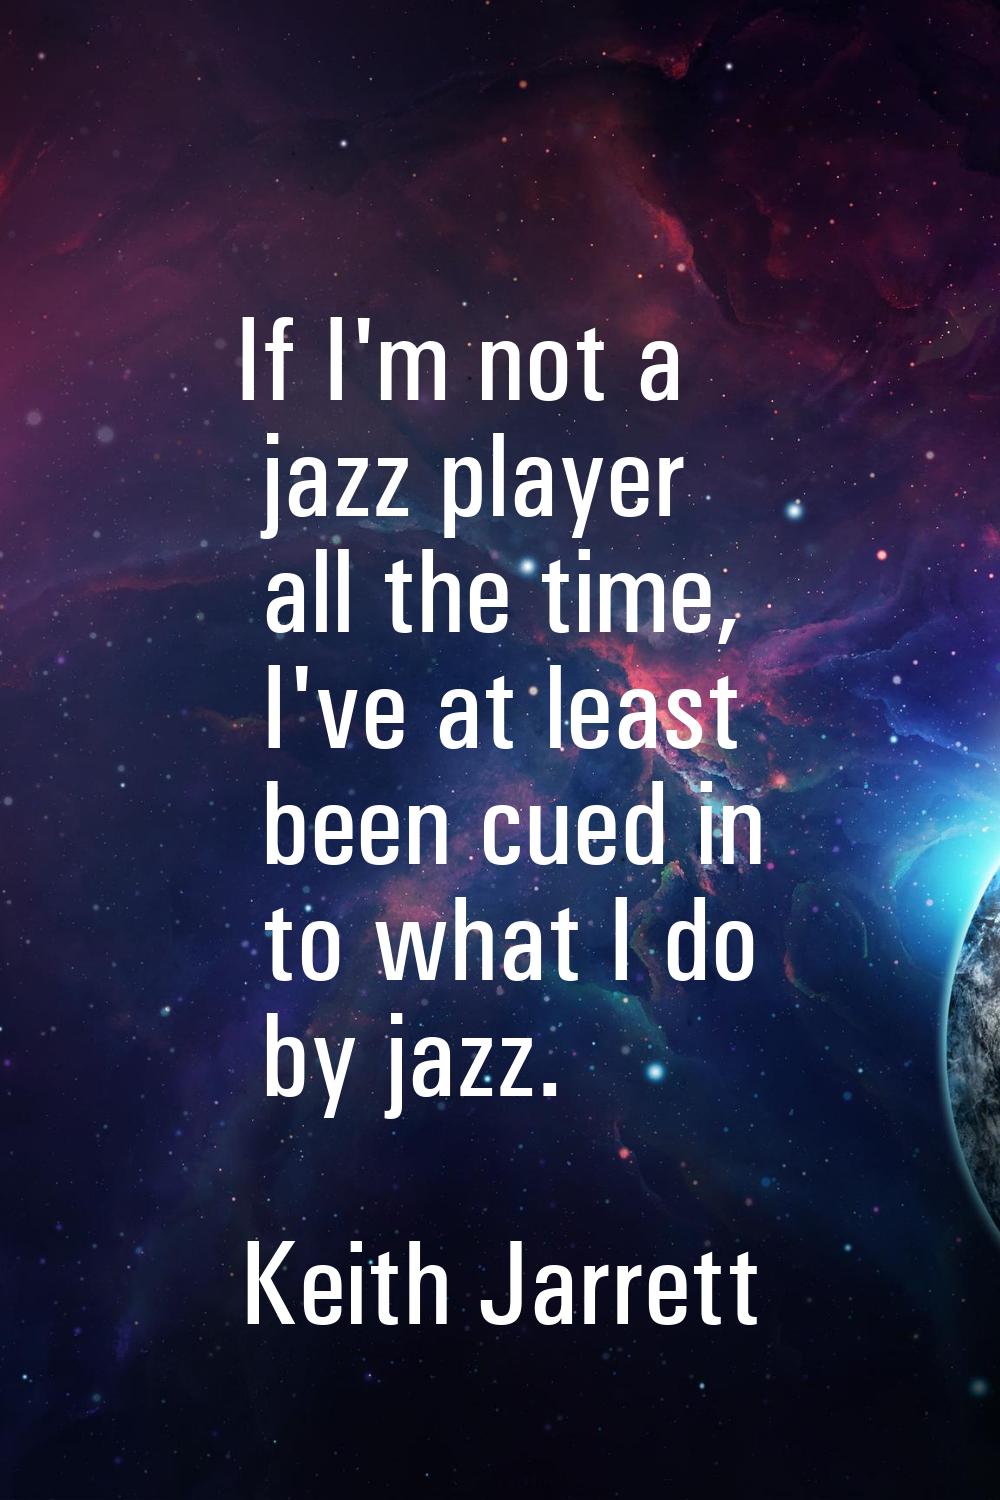 If I'm not a jazz player all the time, I've at least been cued in to what I do by jazz.